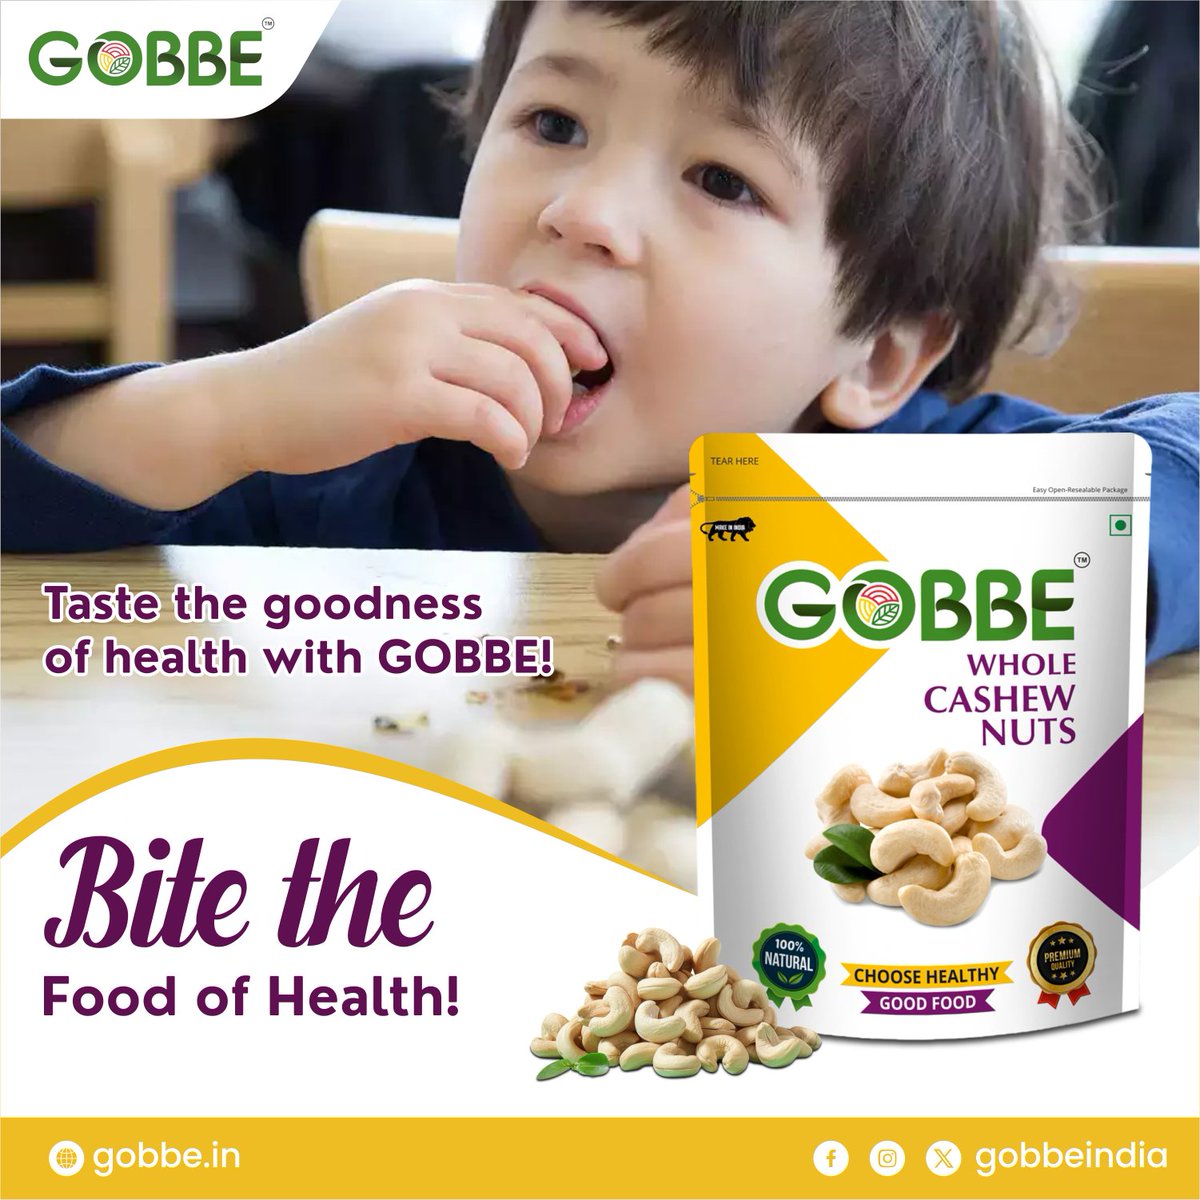 Visit GOBBE - A Health Food & Dry Fruit Store today!
Gobbe.in
linktr.ee/gobbeindia

#gobbe #healthconsciousliving #nutritionnest #premiumdryfruits #nutsandseeds #nature #qualityindulgence #healthy #healthysnacking #dryfruits #dryfruitstore #banglore #india